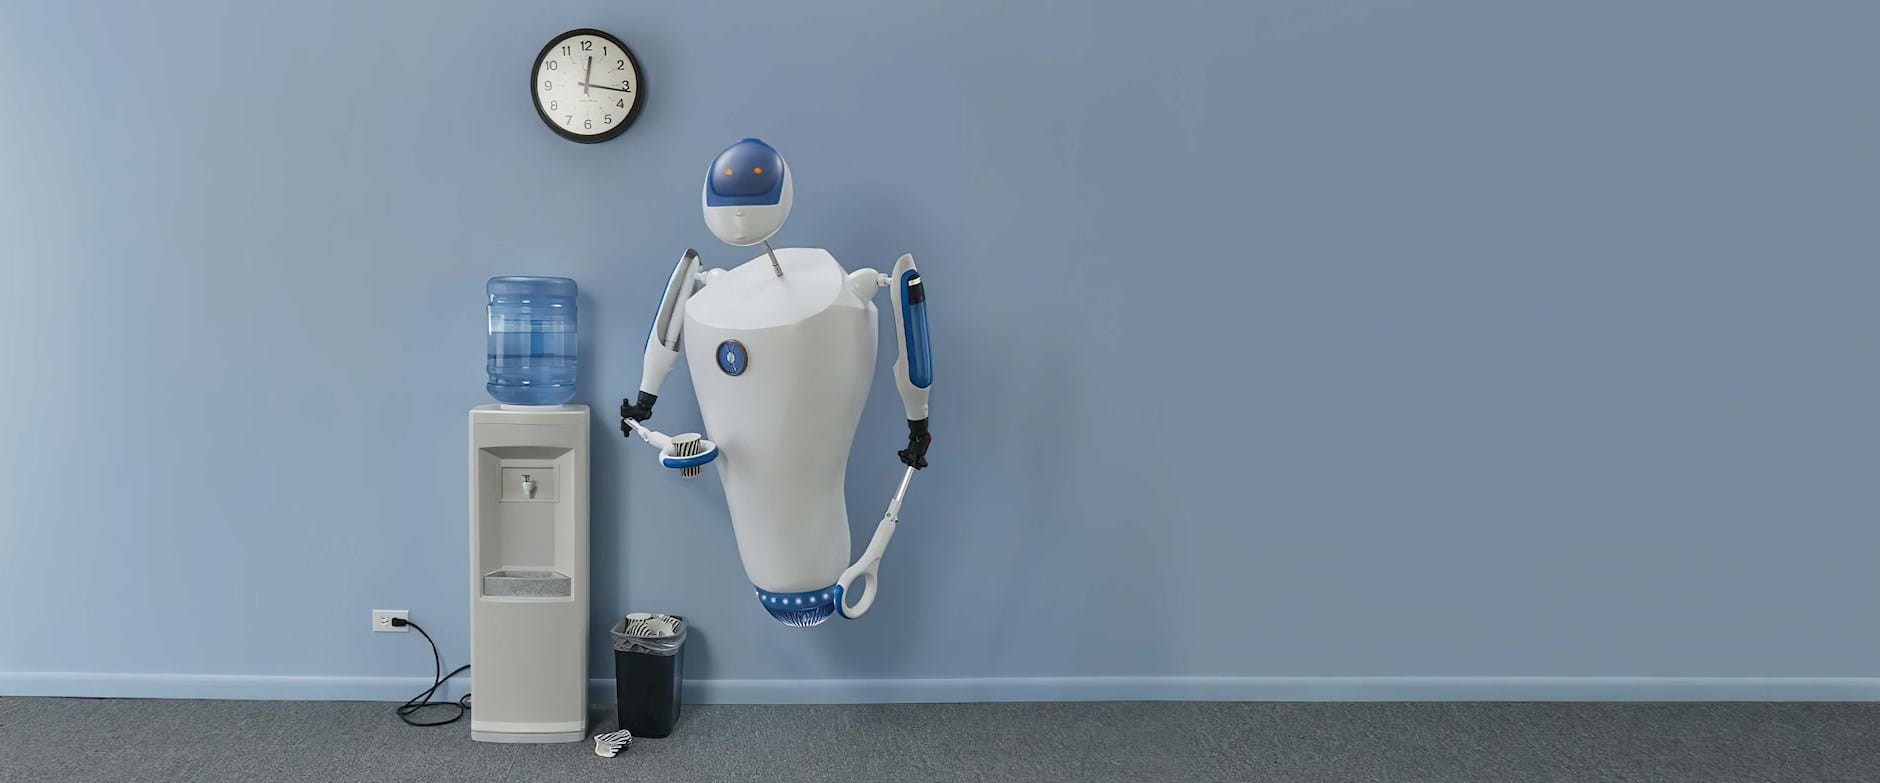 Robot waiting patiently at water cooler